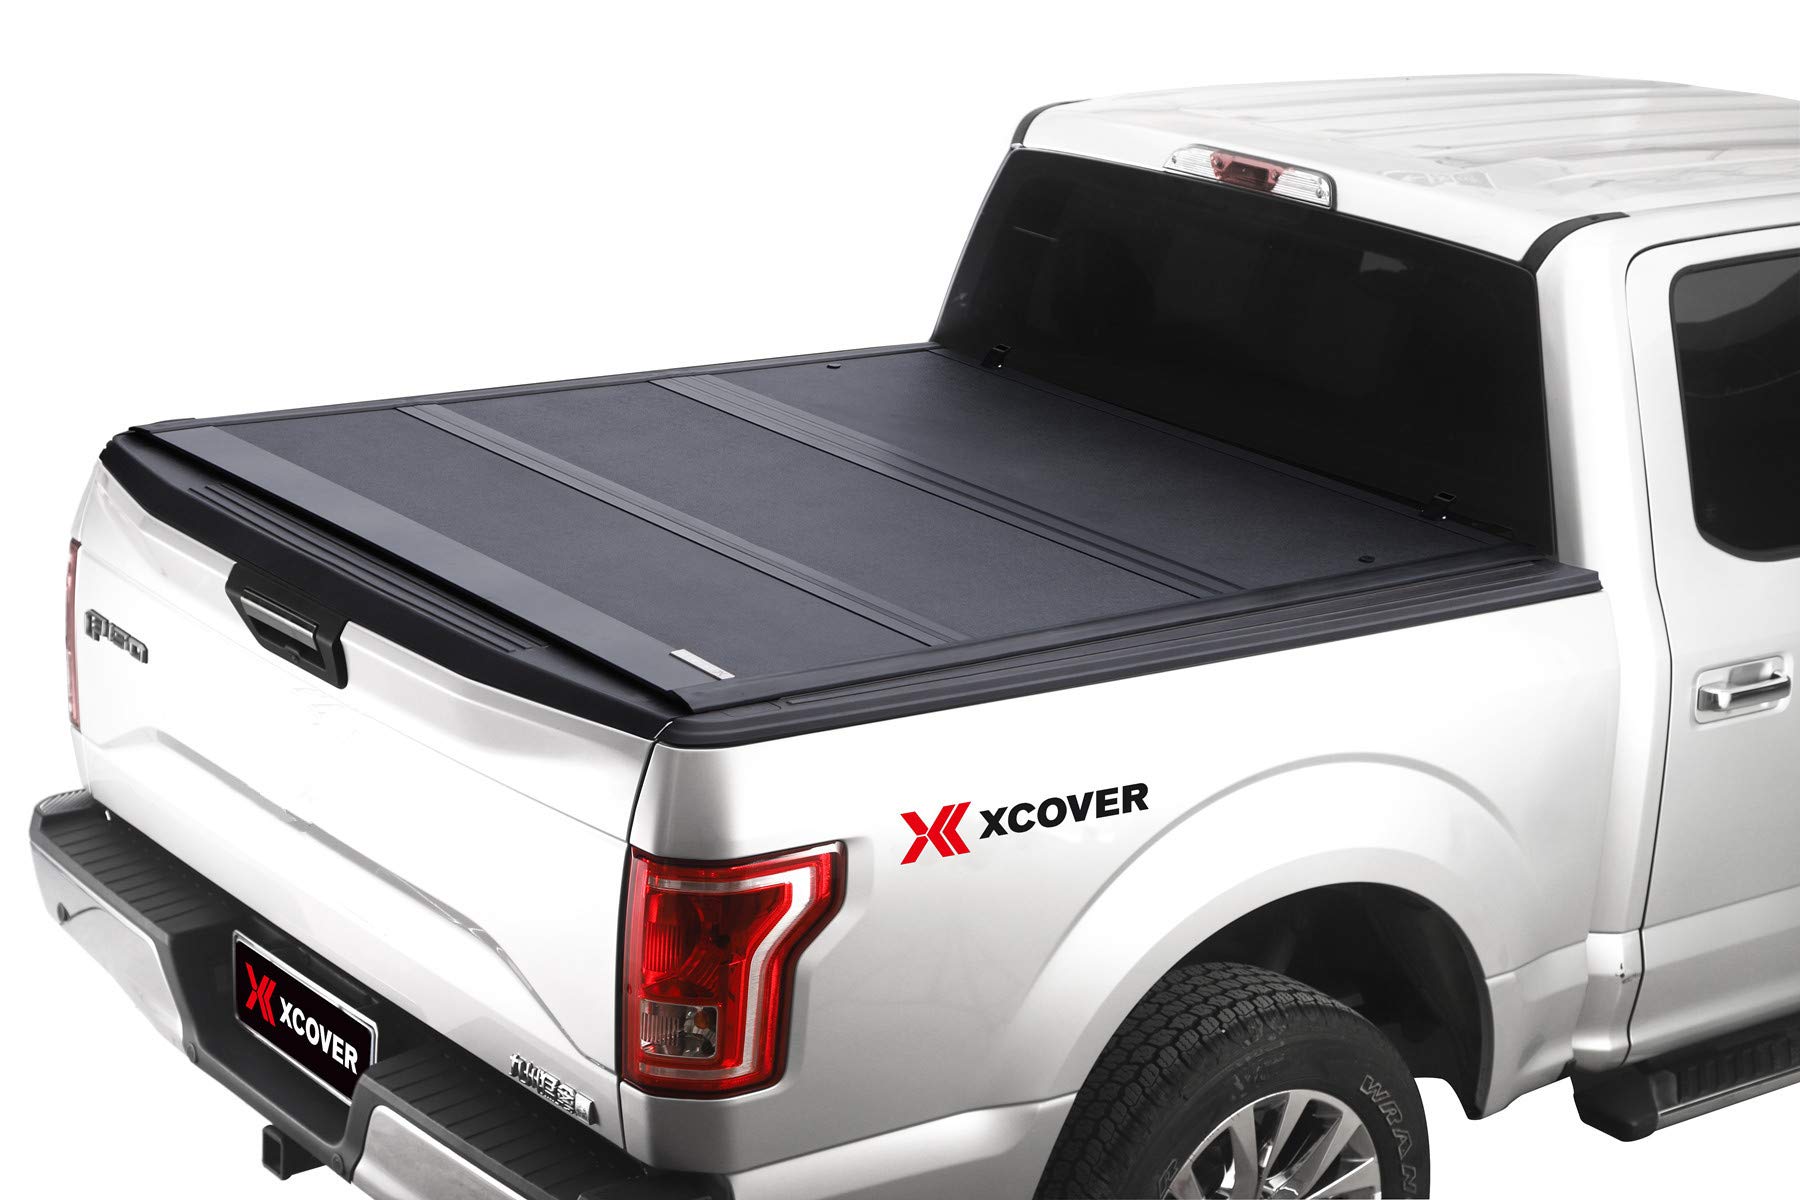 X XCOVER XcOVER Low Profile Hard Folding Truck Bed Tonneau cover, compatible with 2019 2020 2021 2022 2023 SilveradoSierra 1500 65 Bed